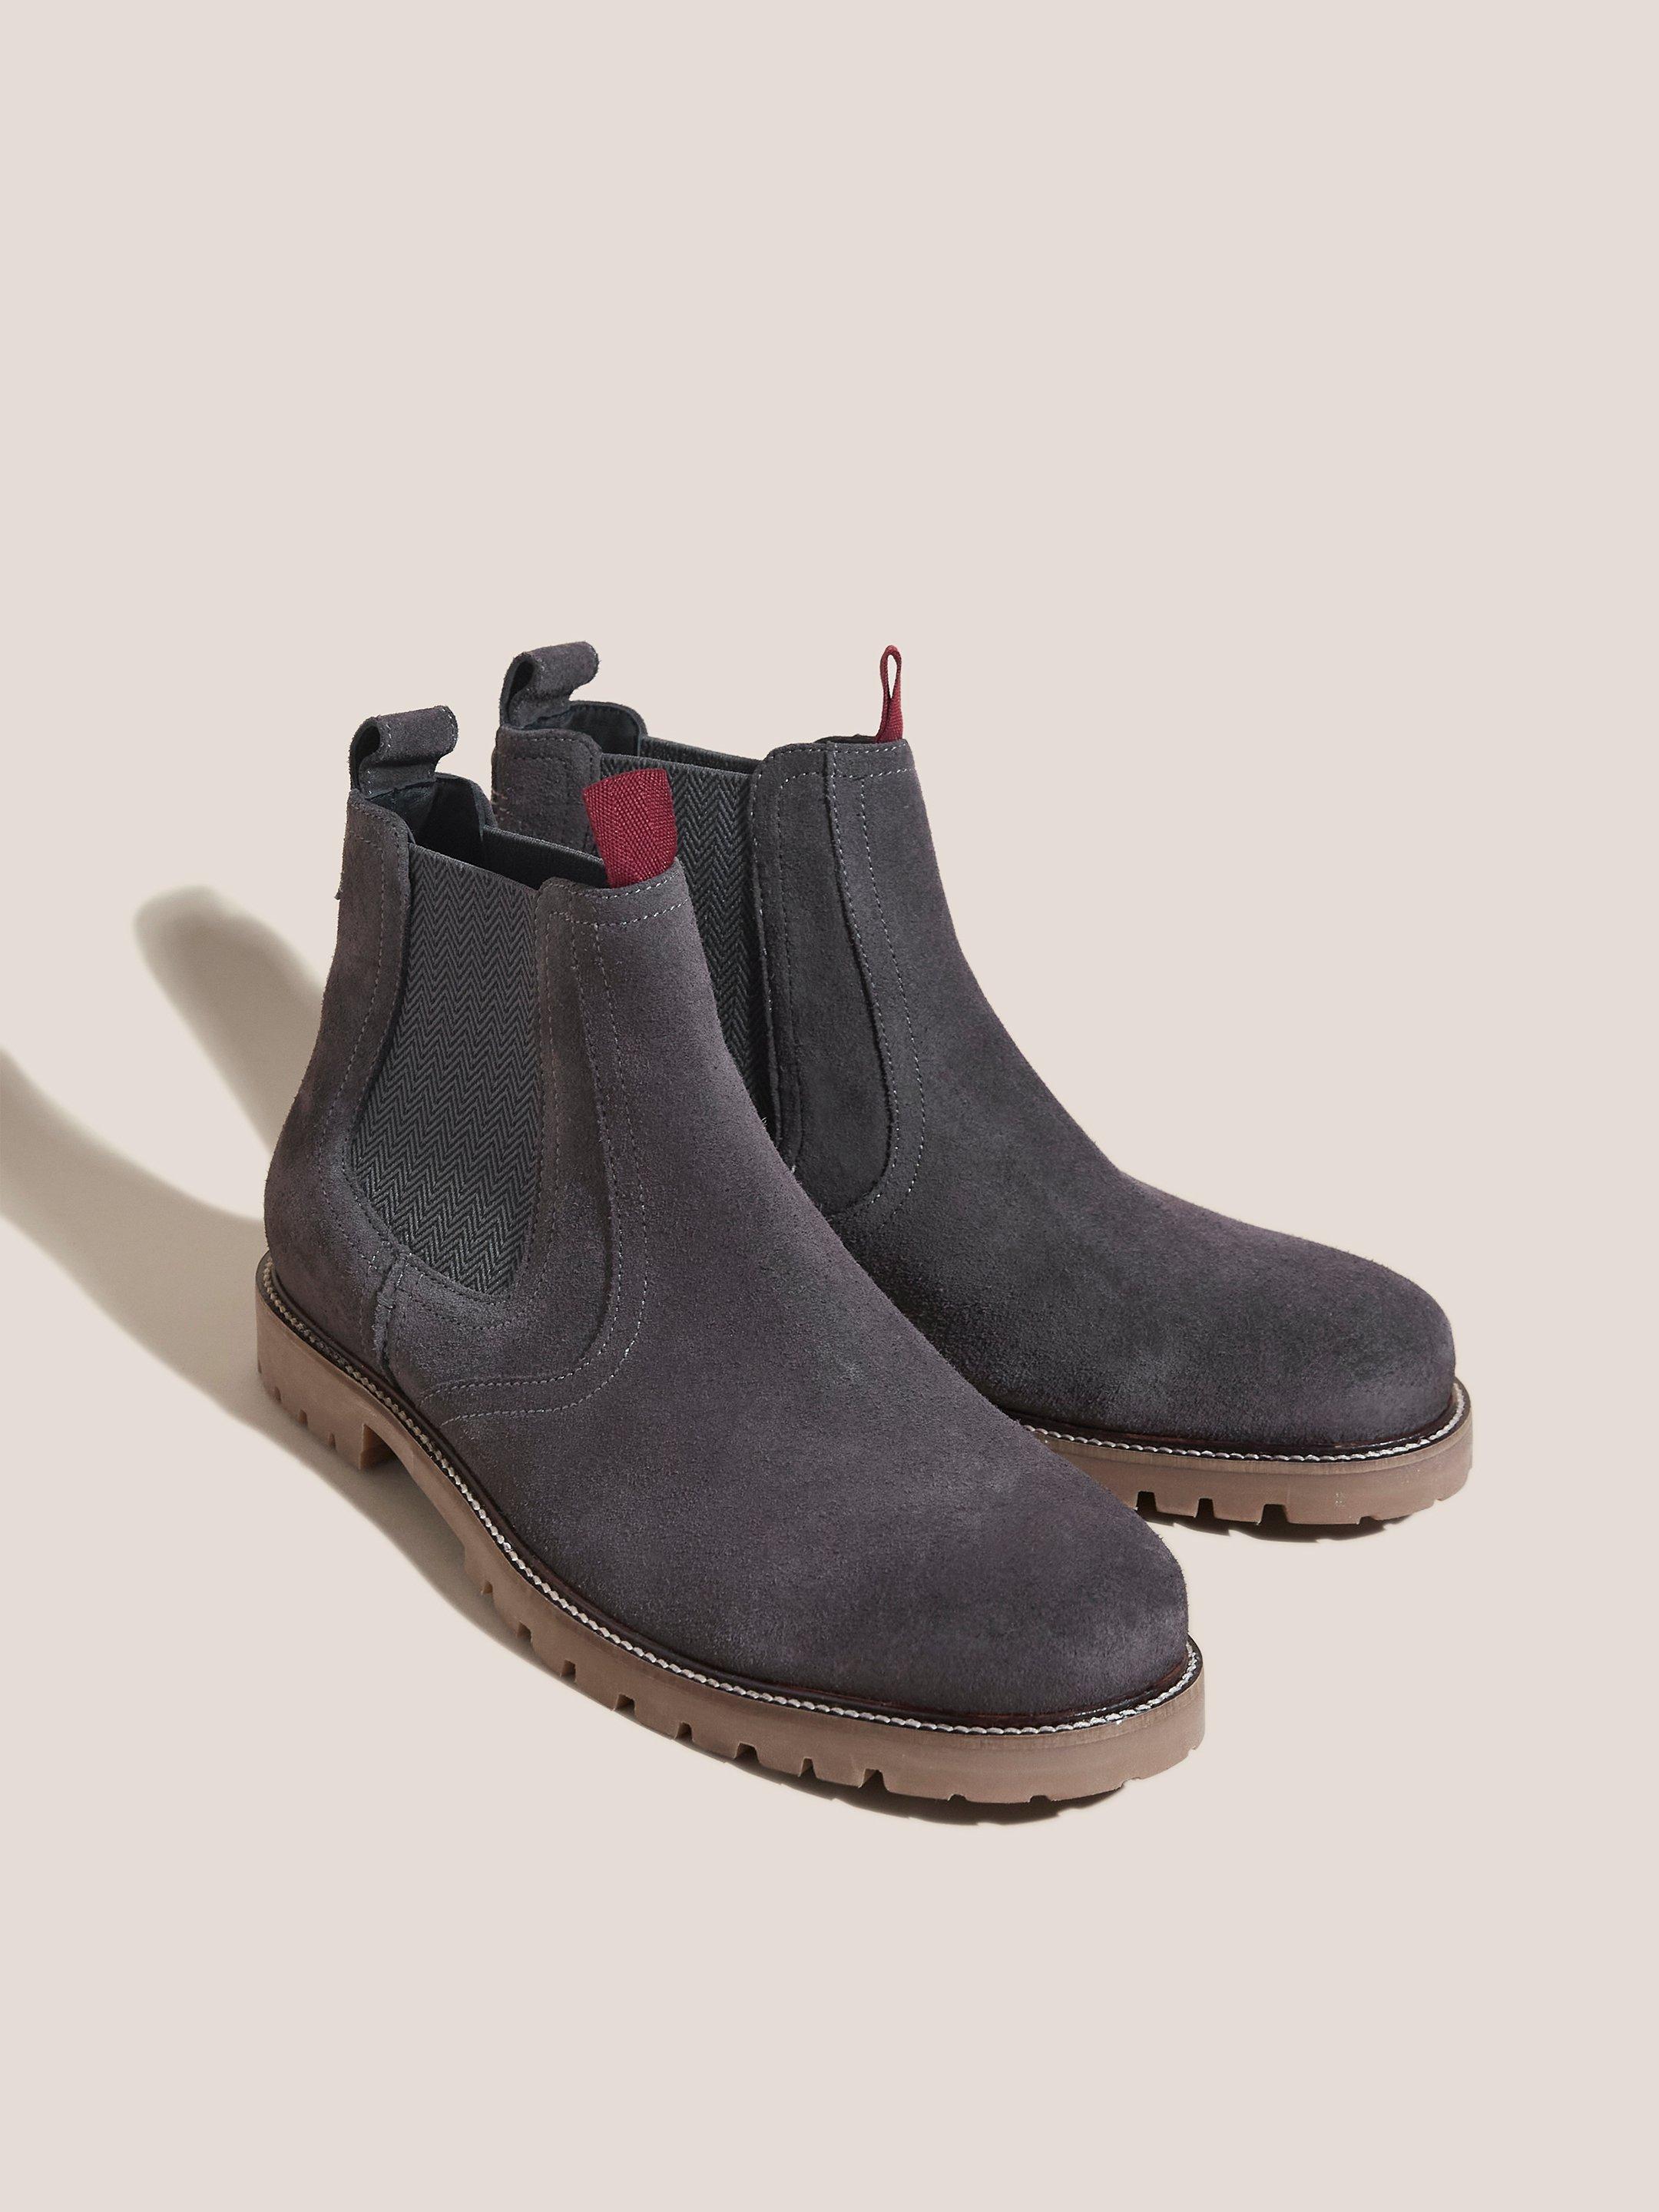 Arthur Leather Chelsea Boot in DUS GREY - FLAT FRONT